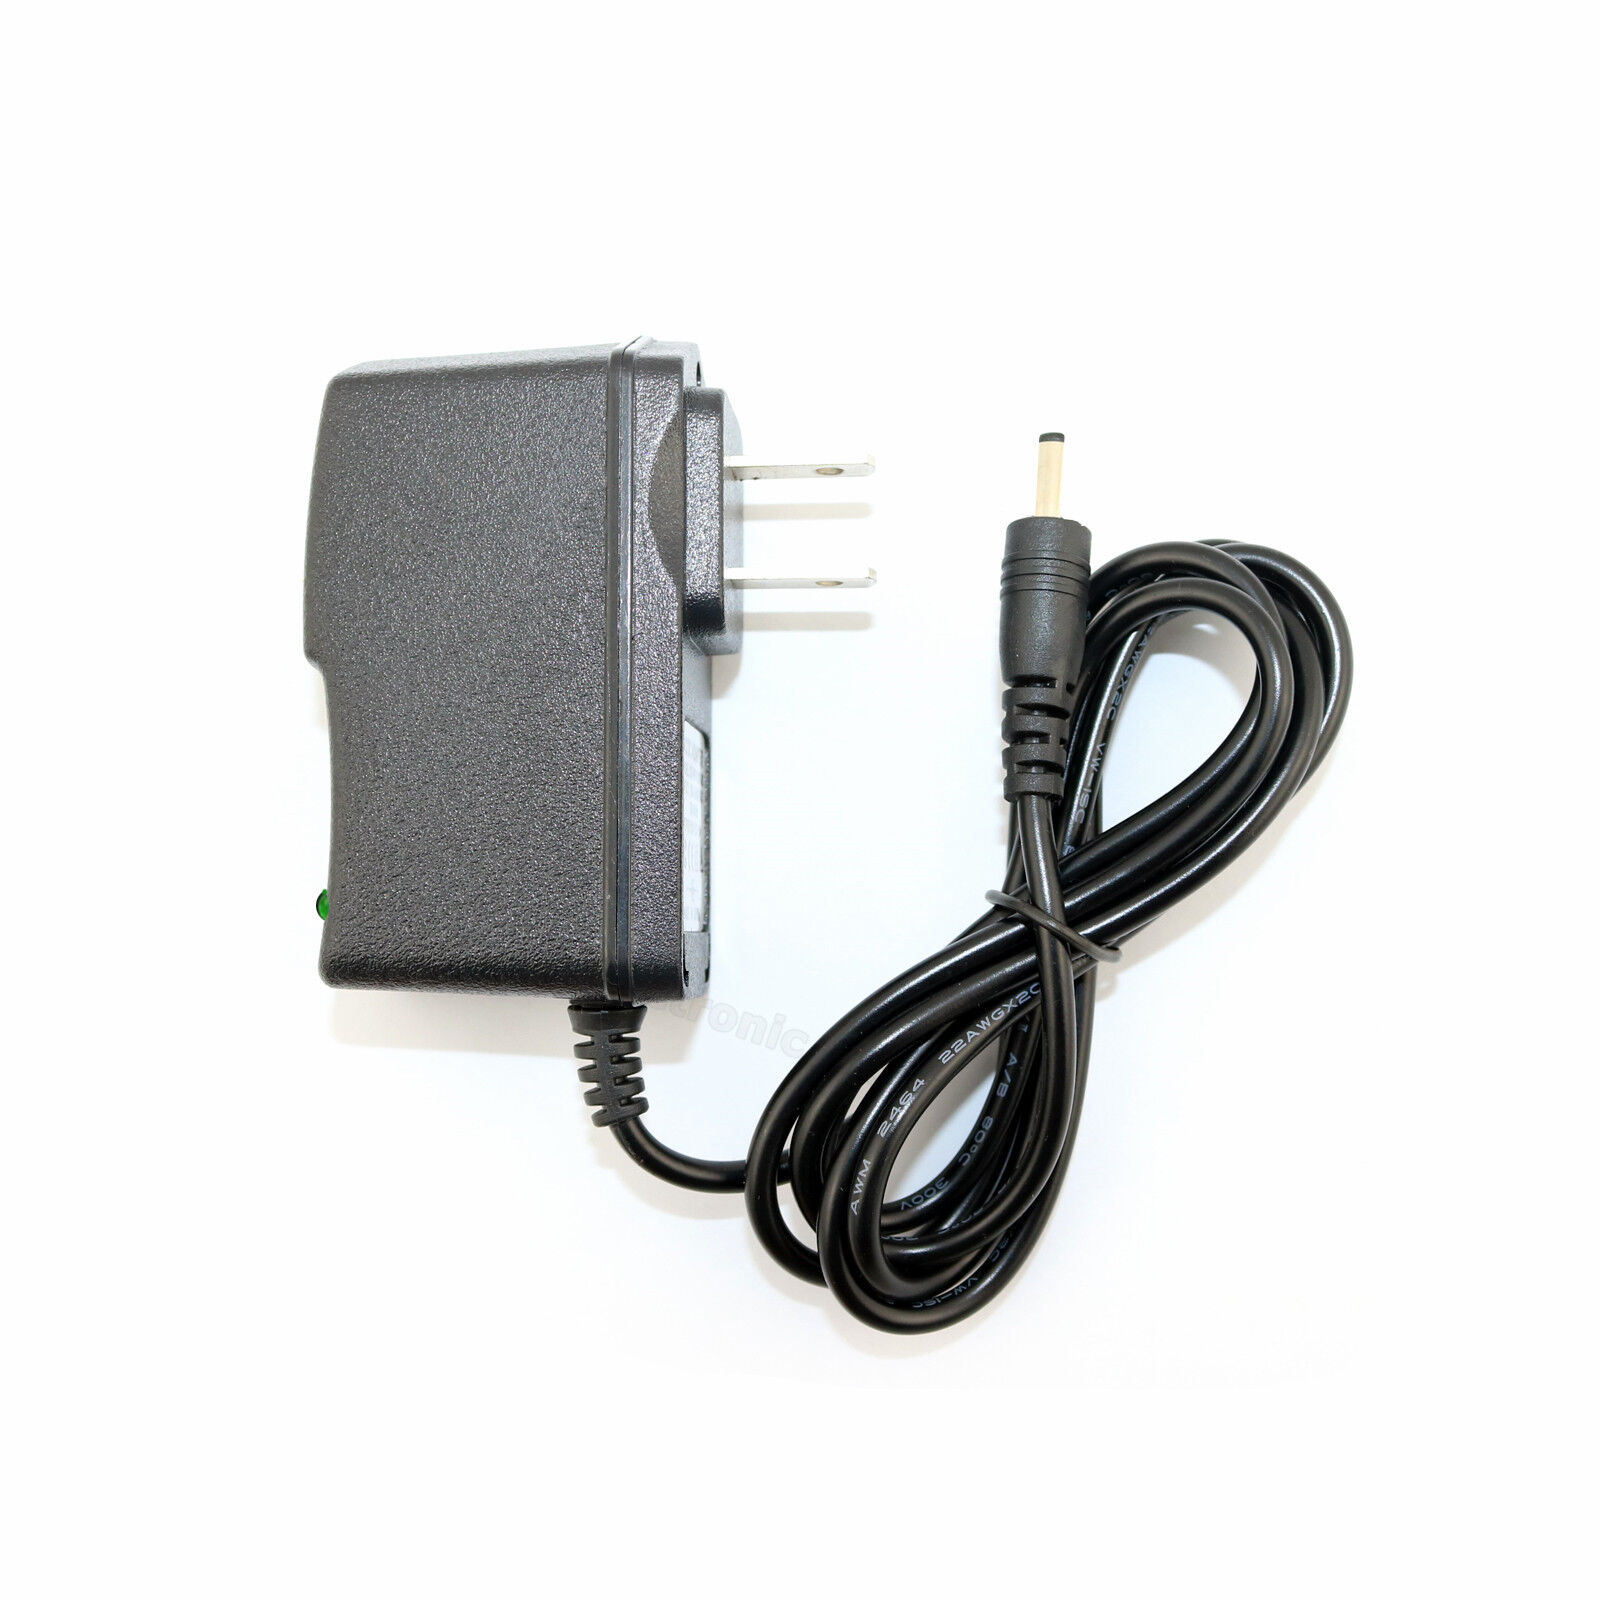 Power Charger AC Adapter 5V 2A (2000mA) 2.5mm x 0.7mm Power Supply Cord New Power Charger AC Adapter 5V 2A (2000mA) 2.